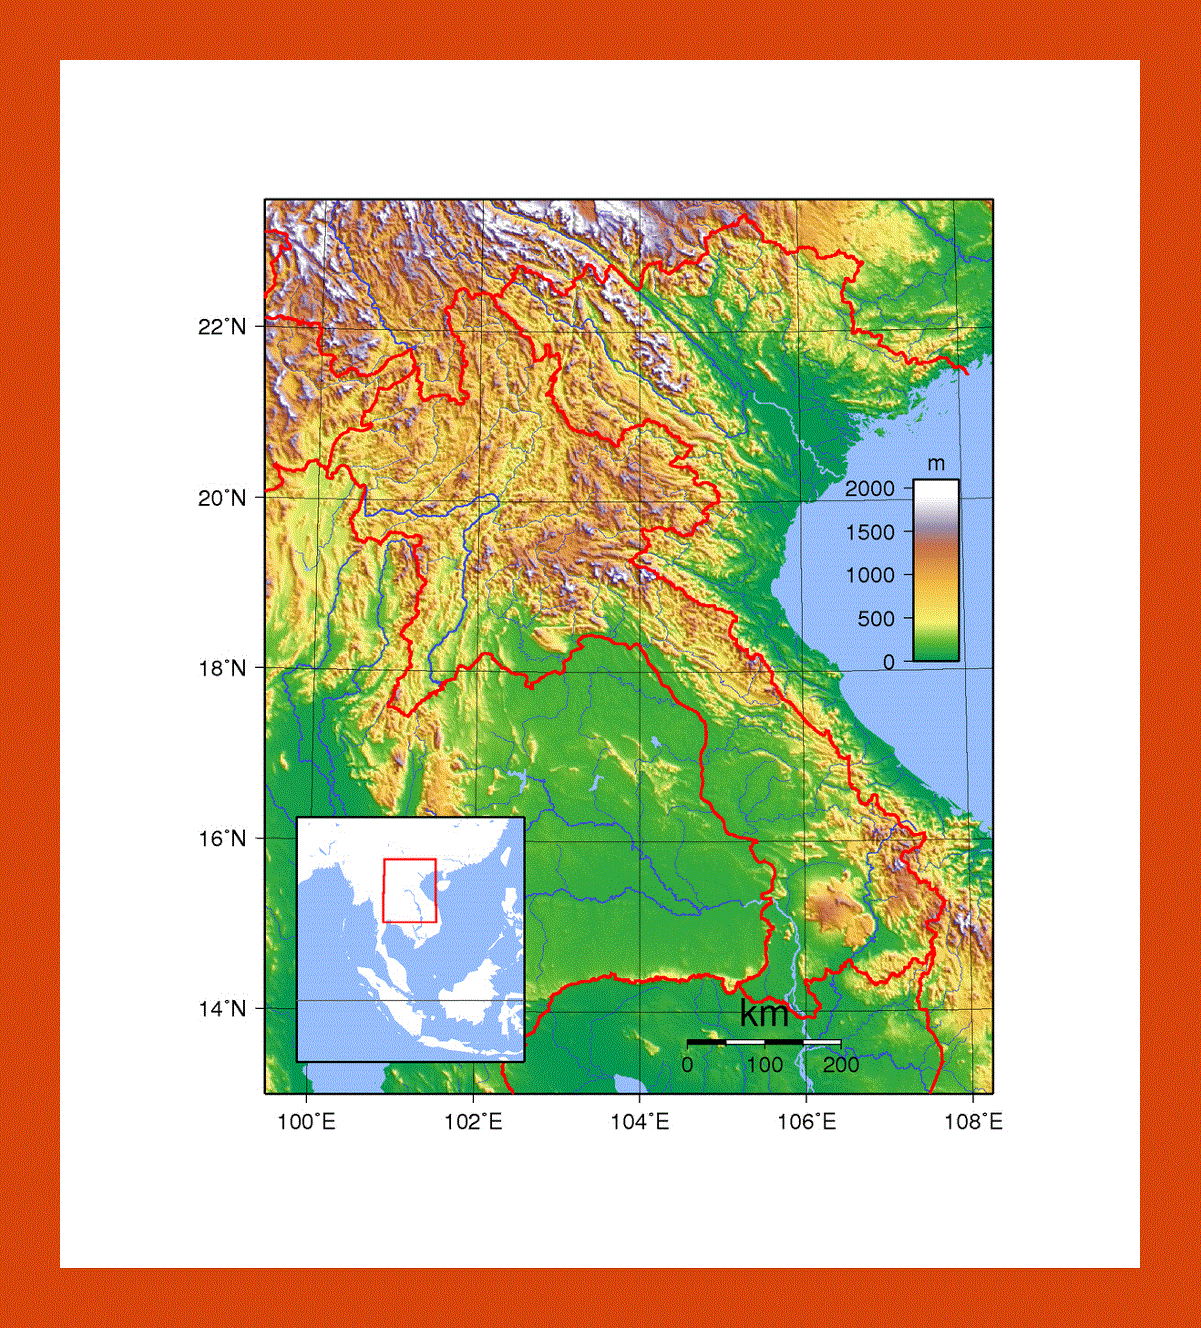 Topographical map of Laos